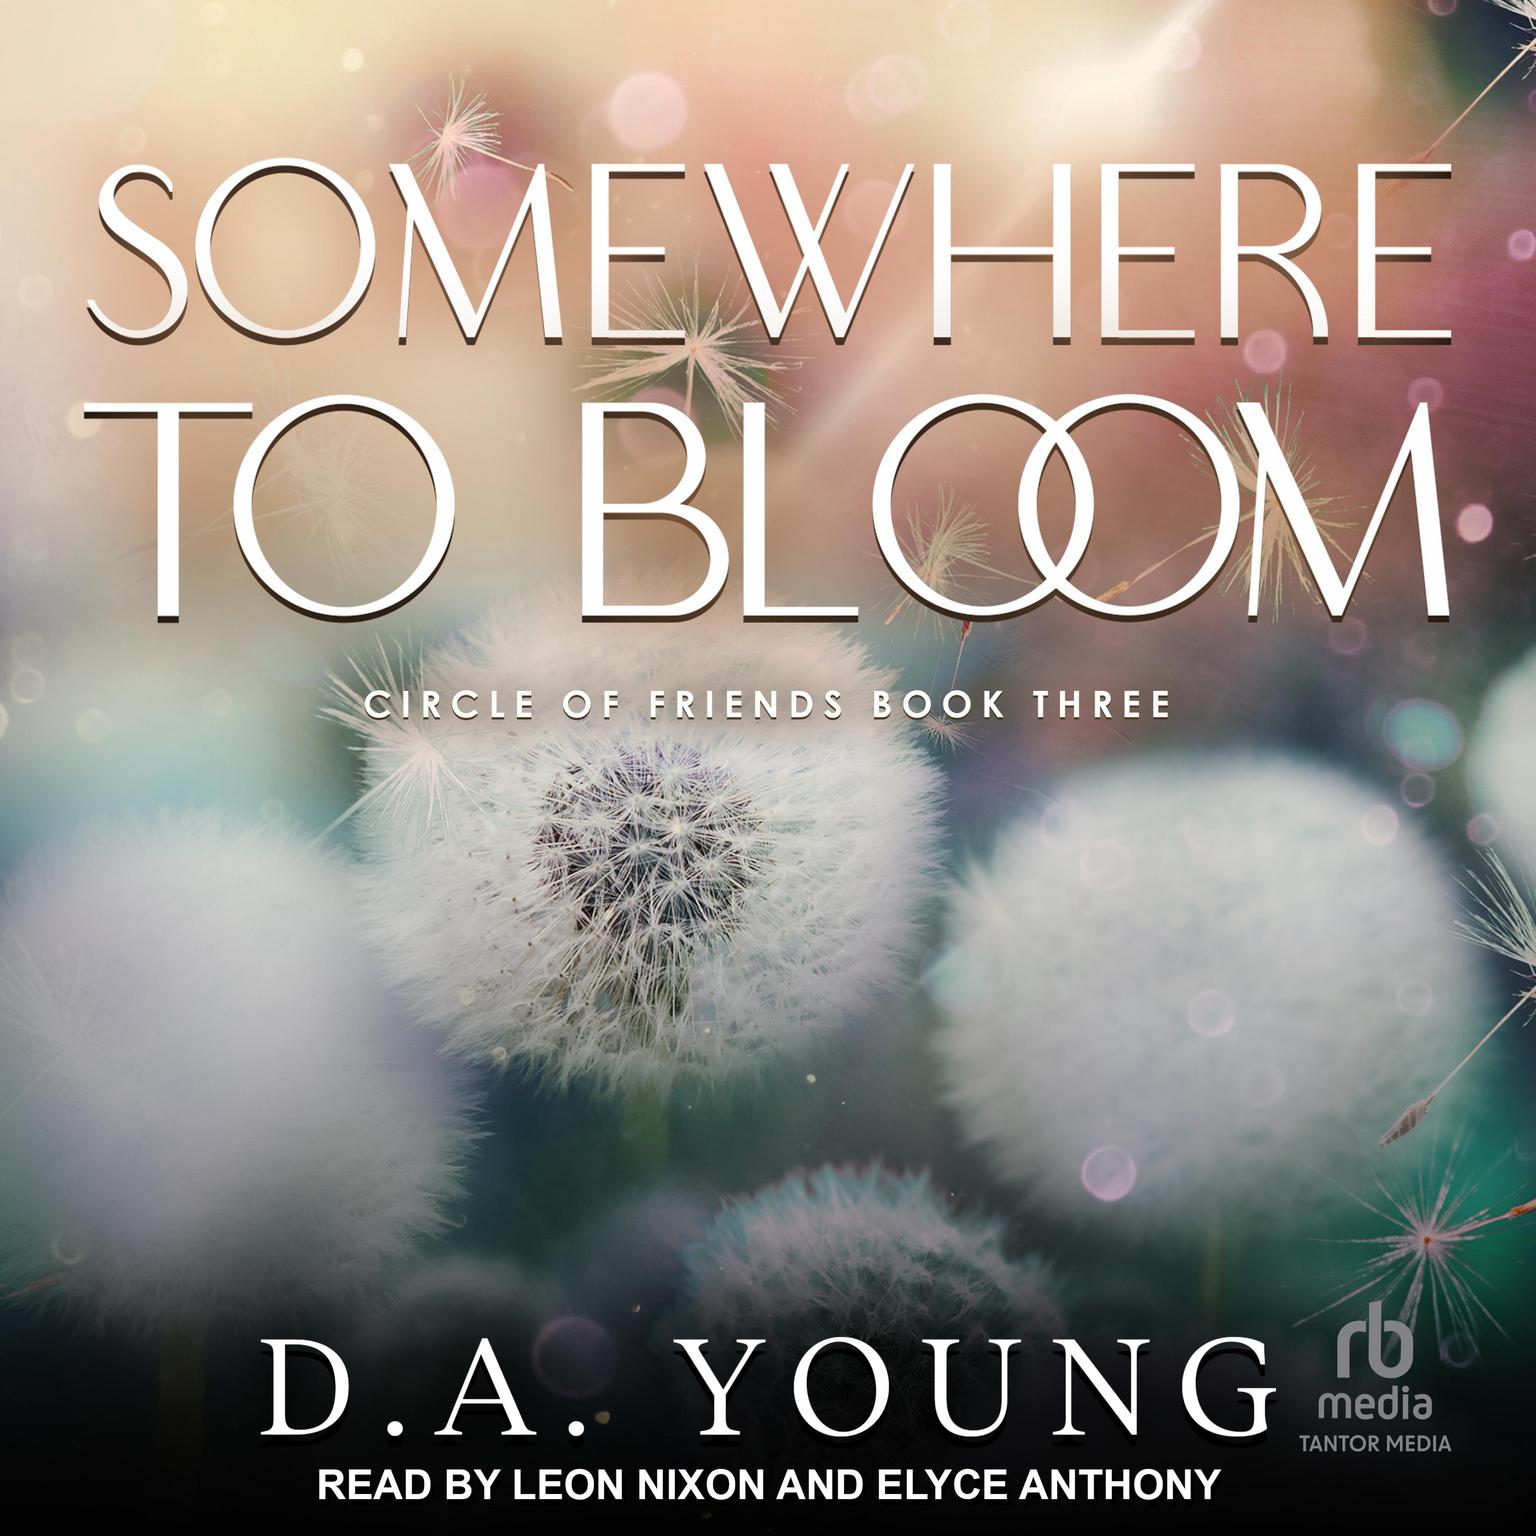 Somewhere To Bloom Audiobook, by D. A. Young